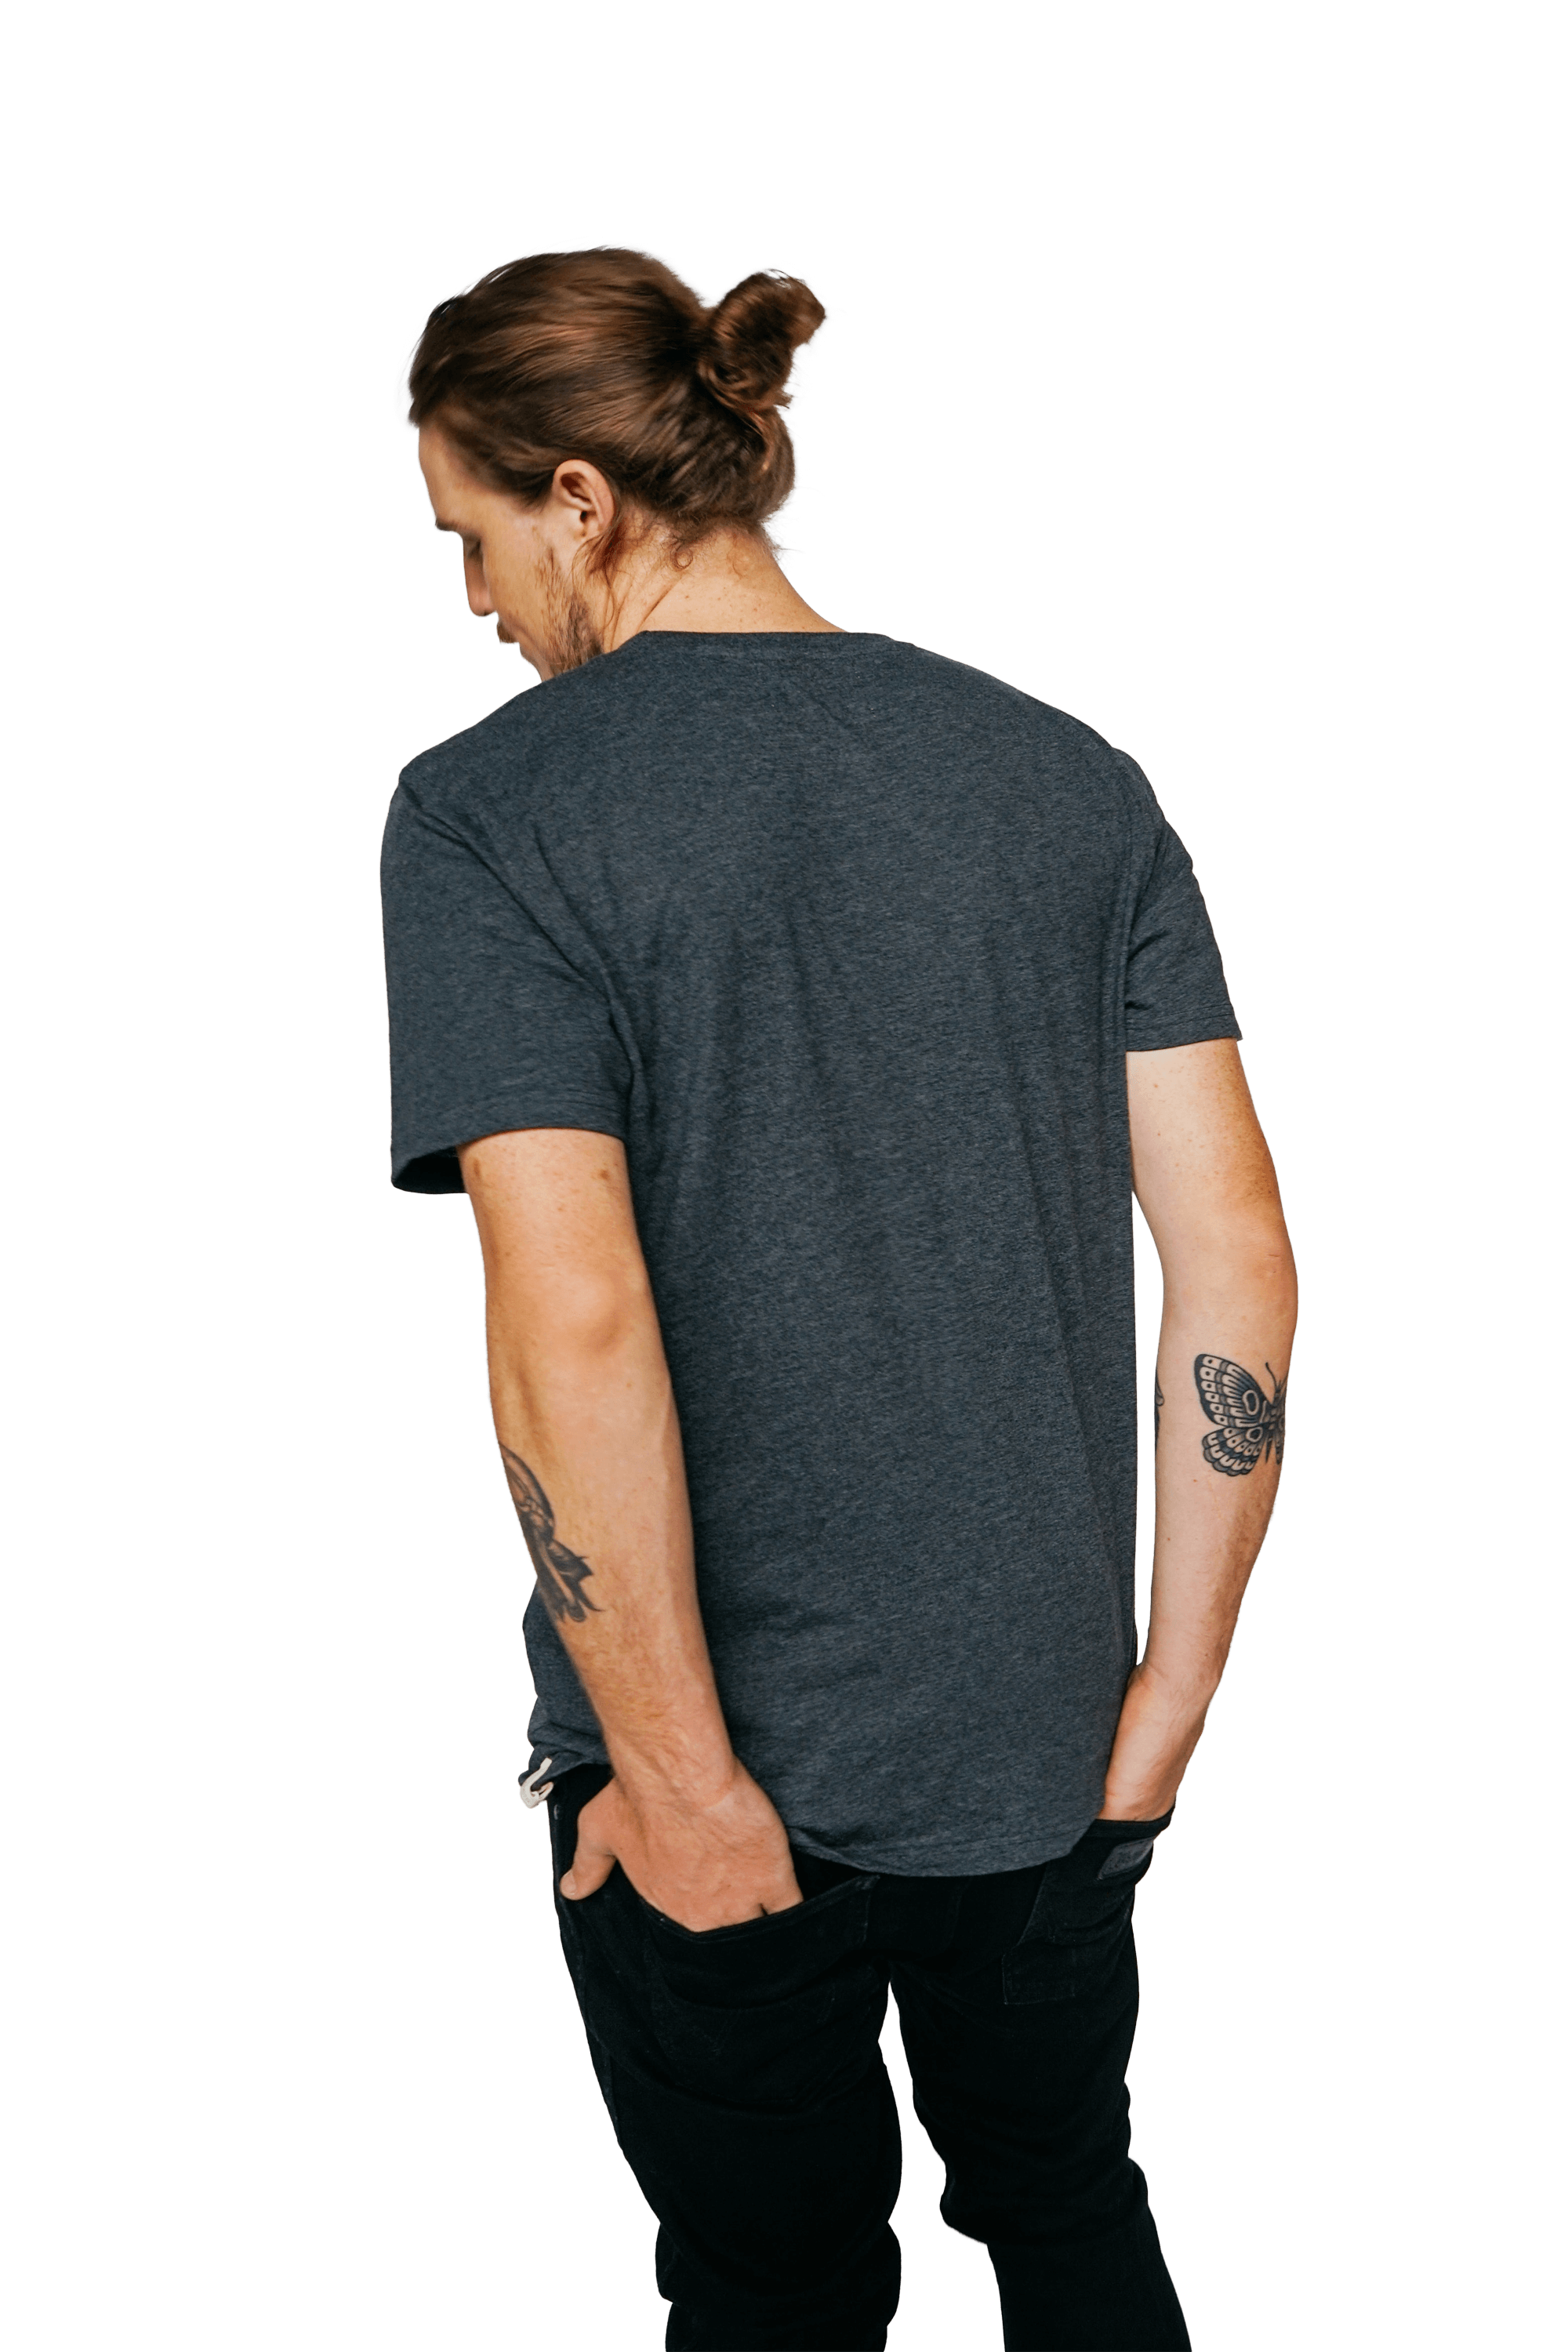 XWASTED men wearing large faded black recycled 100% organic t-shirt